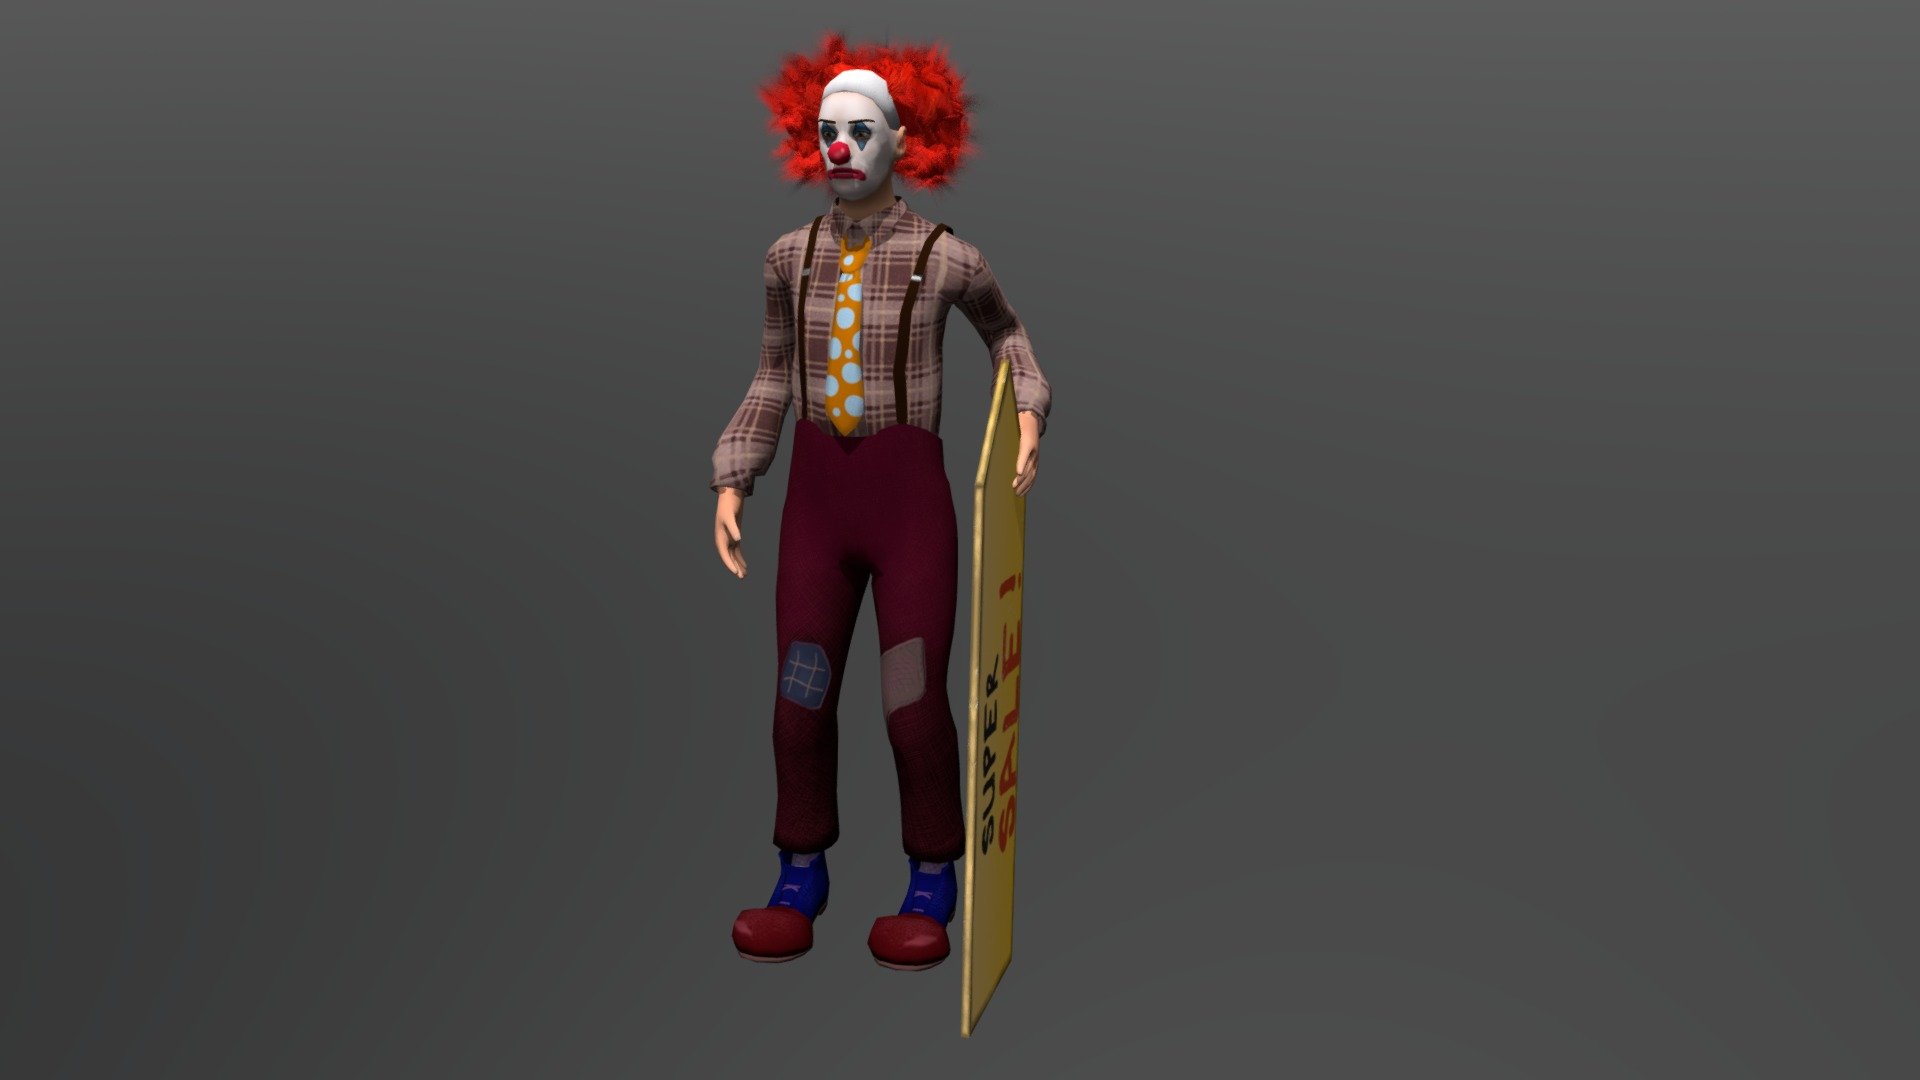 Low Poly Character for a Mobile Game developed in Unreal Engine. Modeled in Blender, textured in Substance Painter and Rigged in ARTv1 in maya - Sad Clown - 3D model by Flor.Actis 3d model